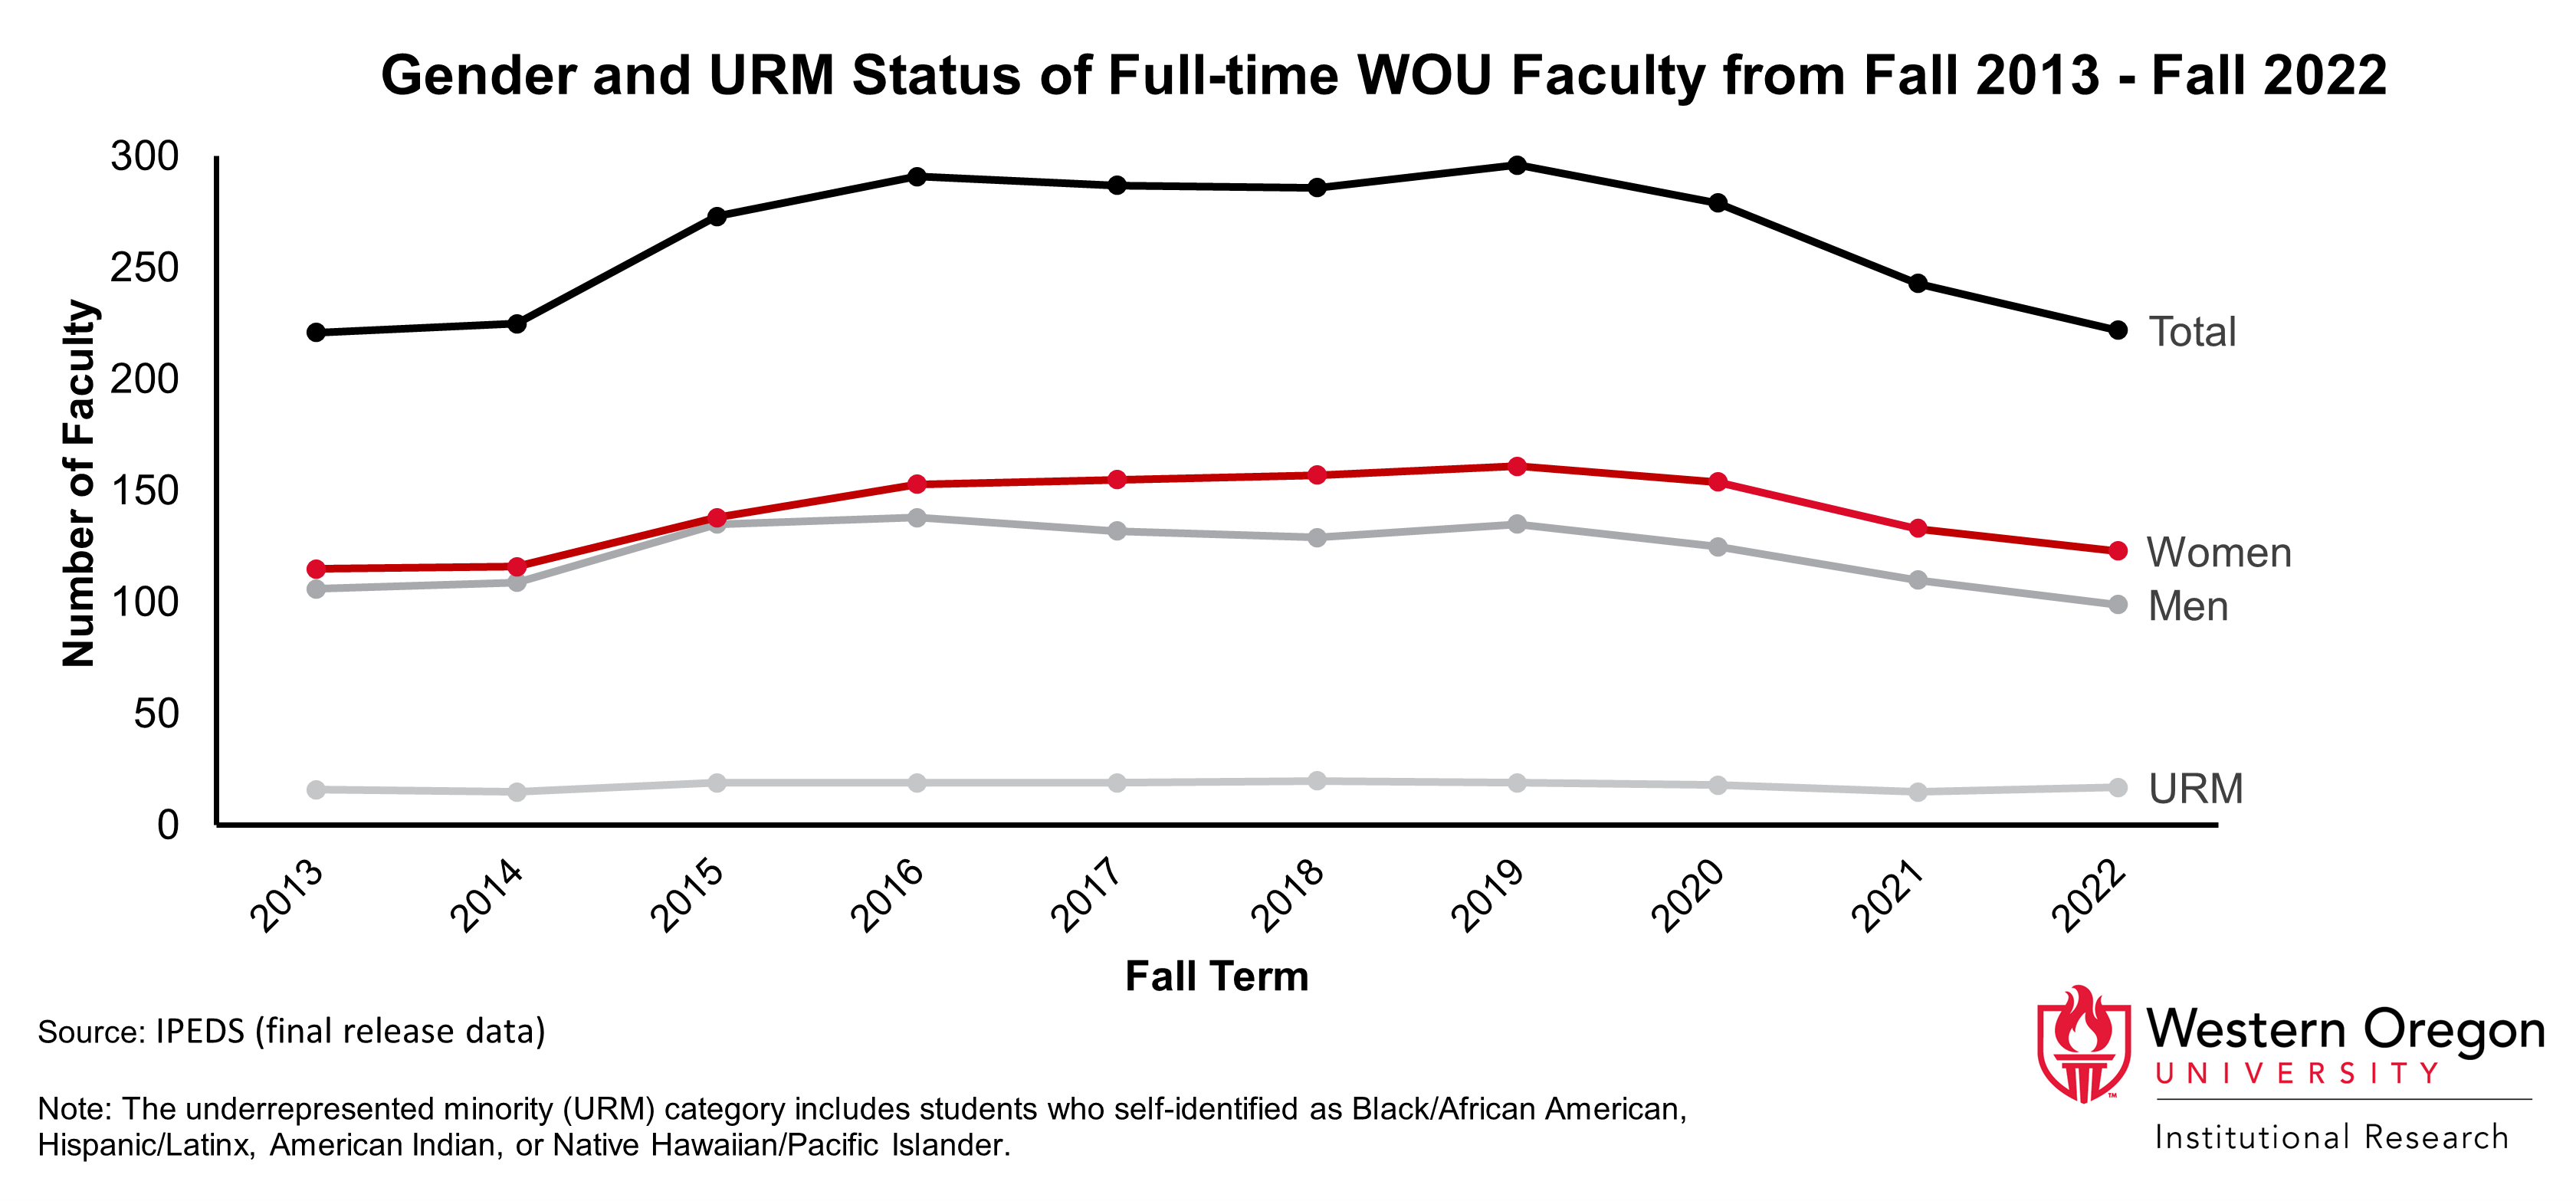 Line graph of the number of all full-time faculty, full-time faculty that identify as men, full-time faculty that identify as men women, and full-time faculty that identify as members of an underrepresented minority group. The number of faculty increased from 2013-2019, then decreased in recent years.